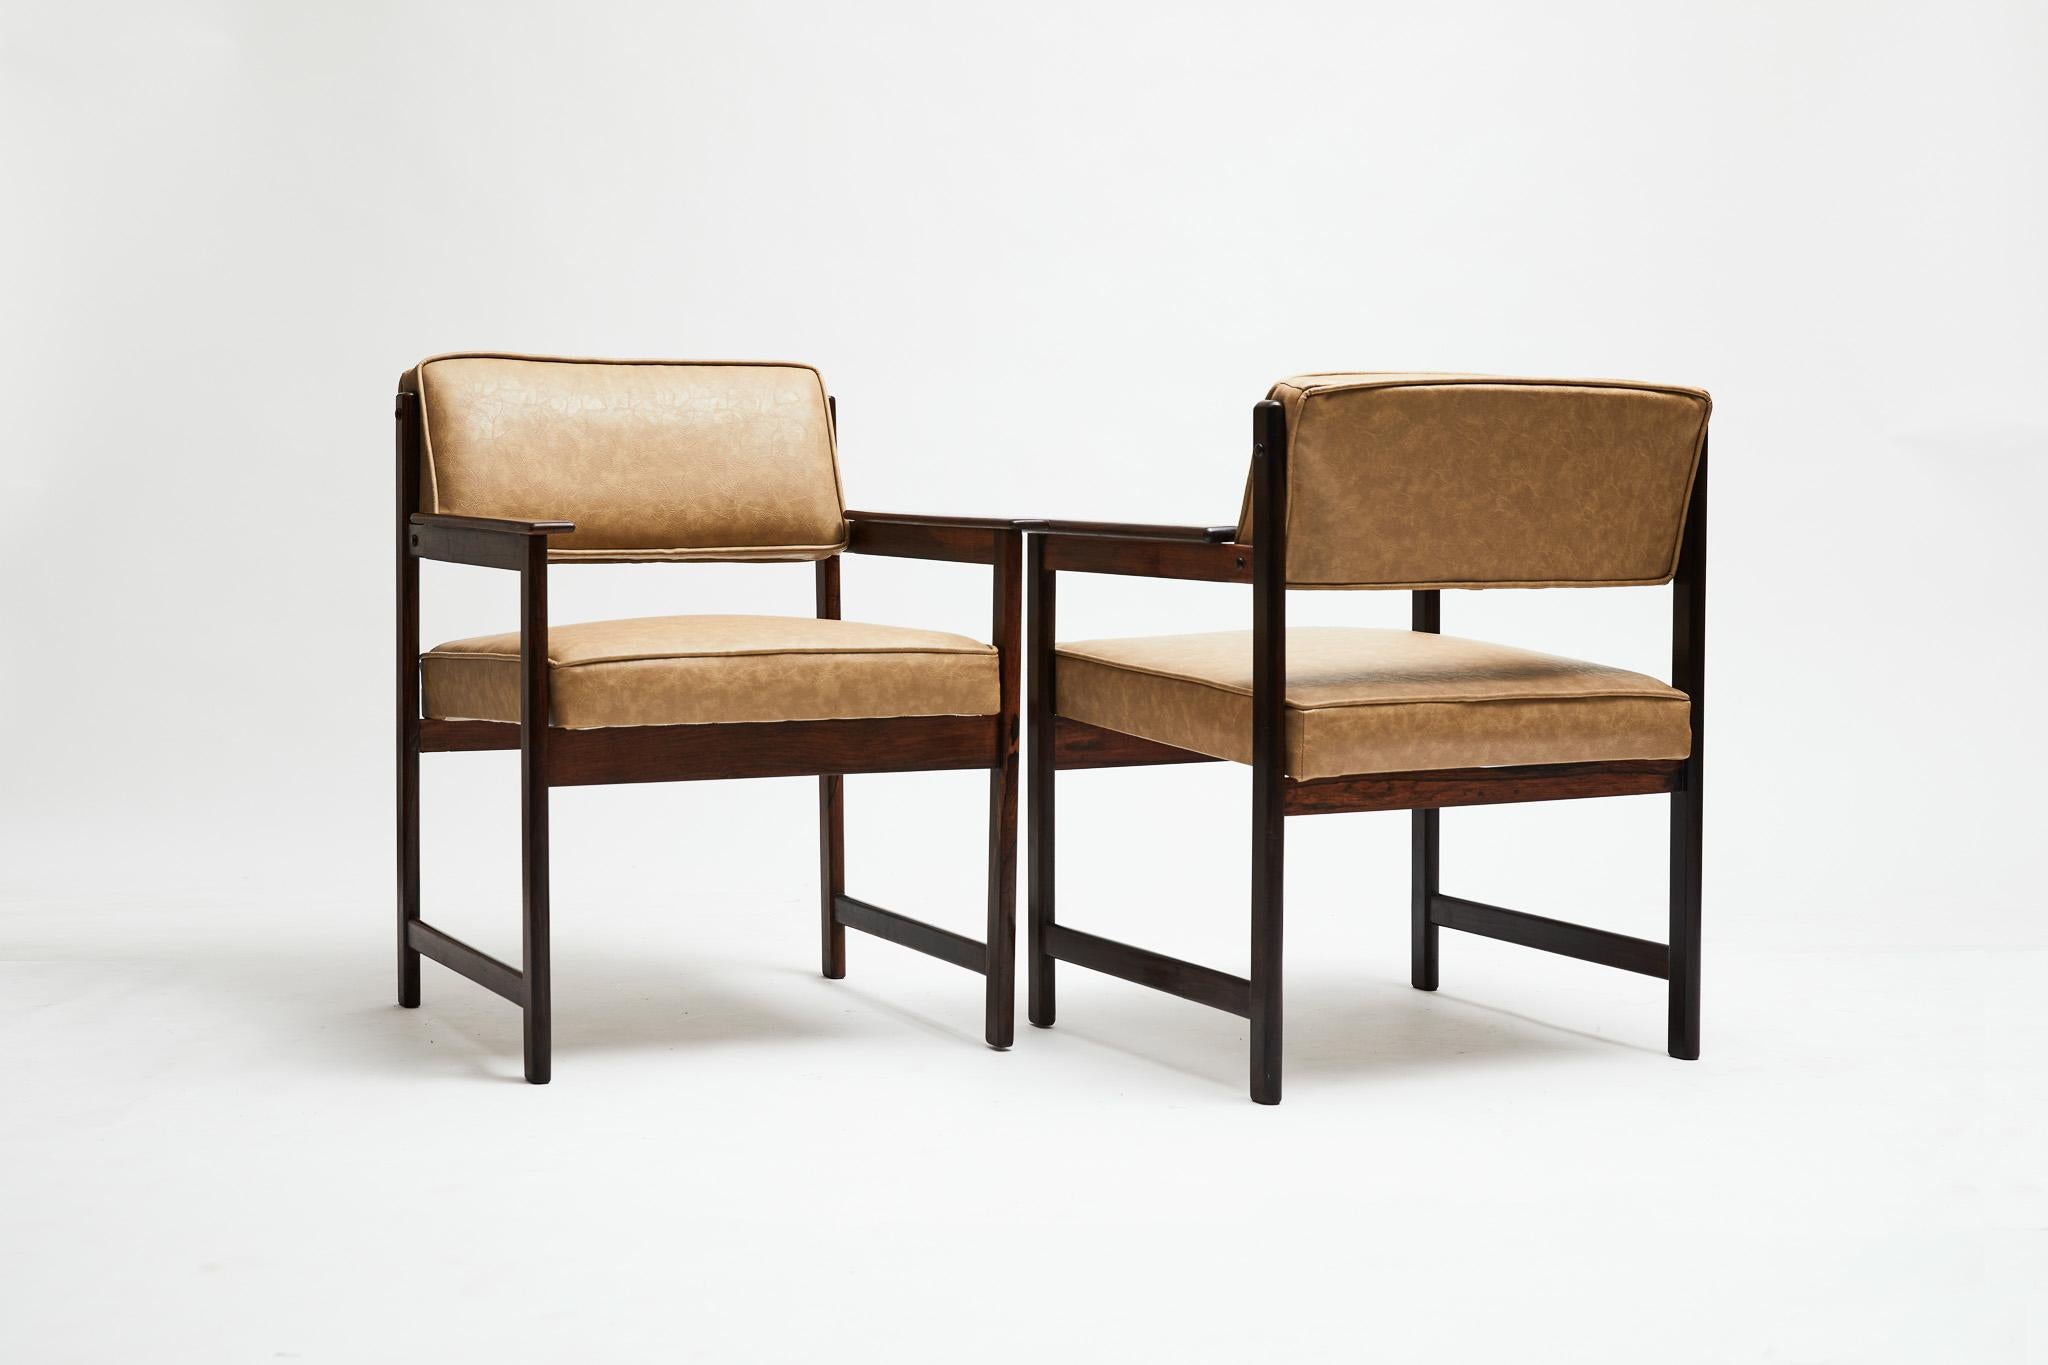 Faux Leather Midcentury Modern Armchairs in Hardwood & Beige Leather by Jorge Jabour, Brazil